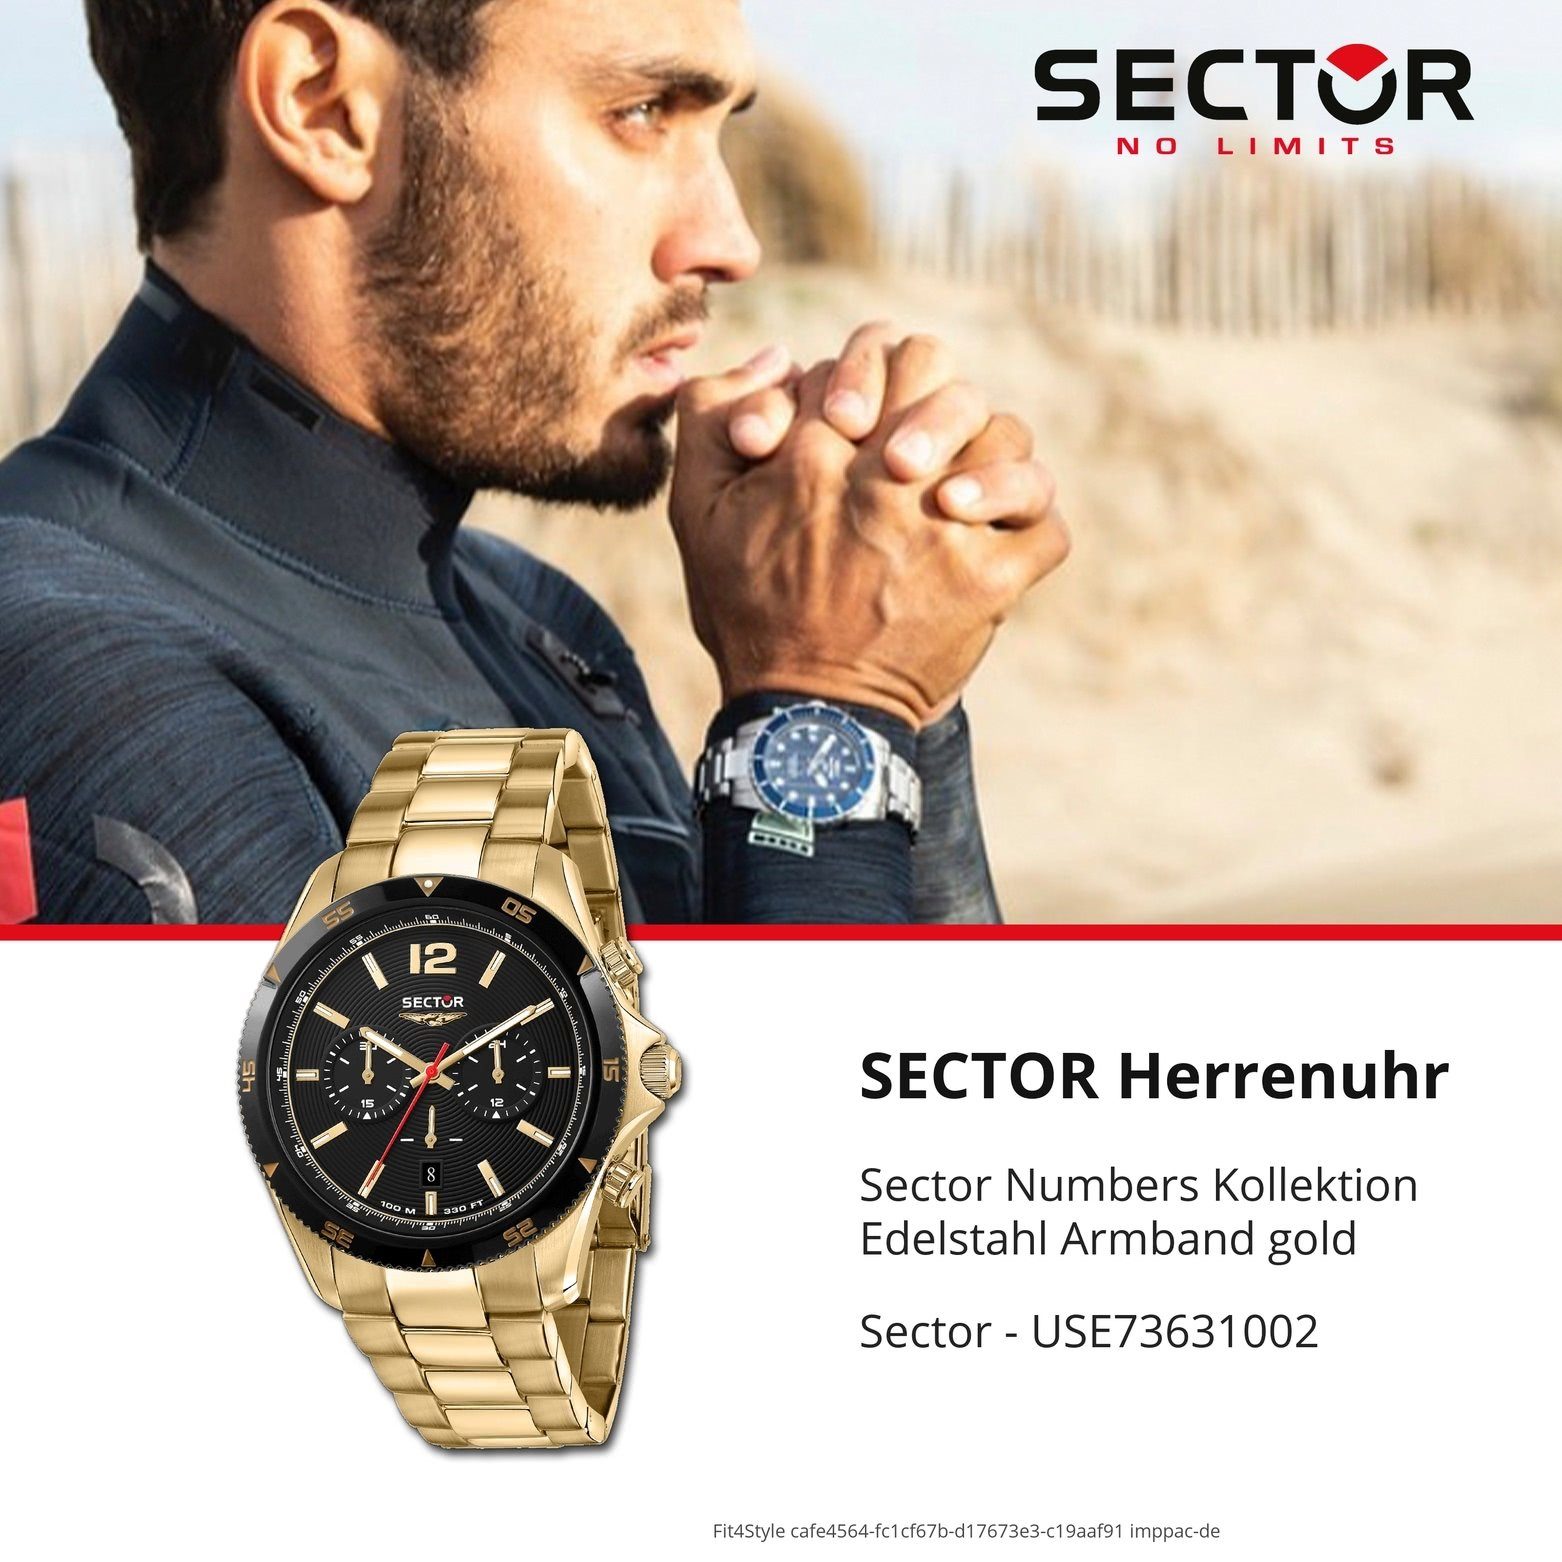 Sector Chronograph Sector rund, (45mm), Edelstahlarmband Armbanduhr Herren Chrono, gold, Armbanduhr Herren Fashion groß